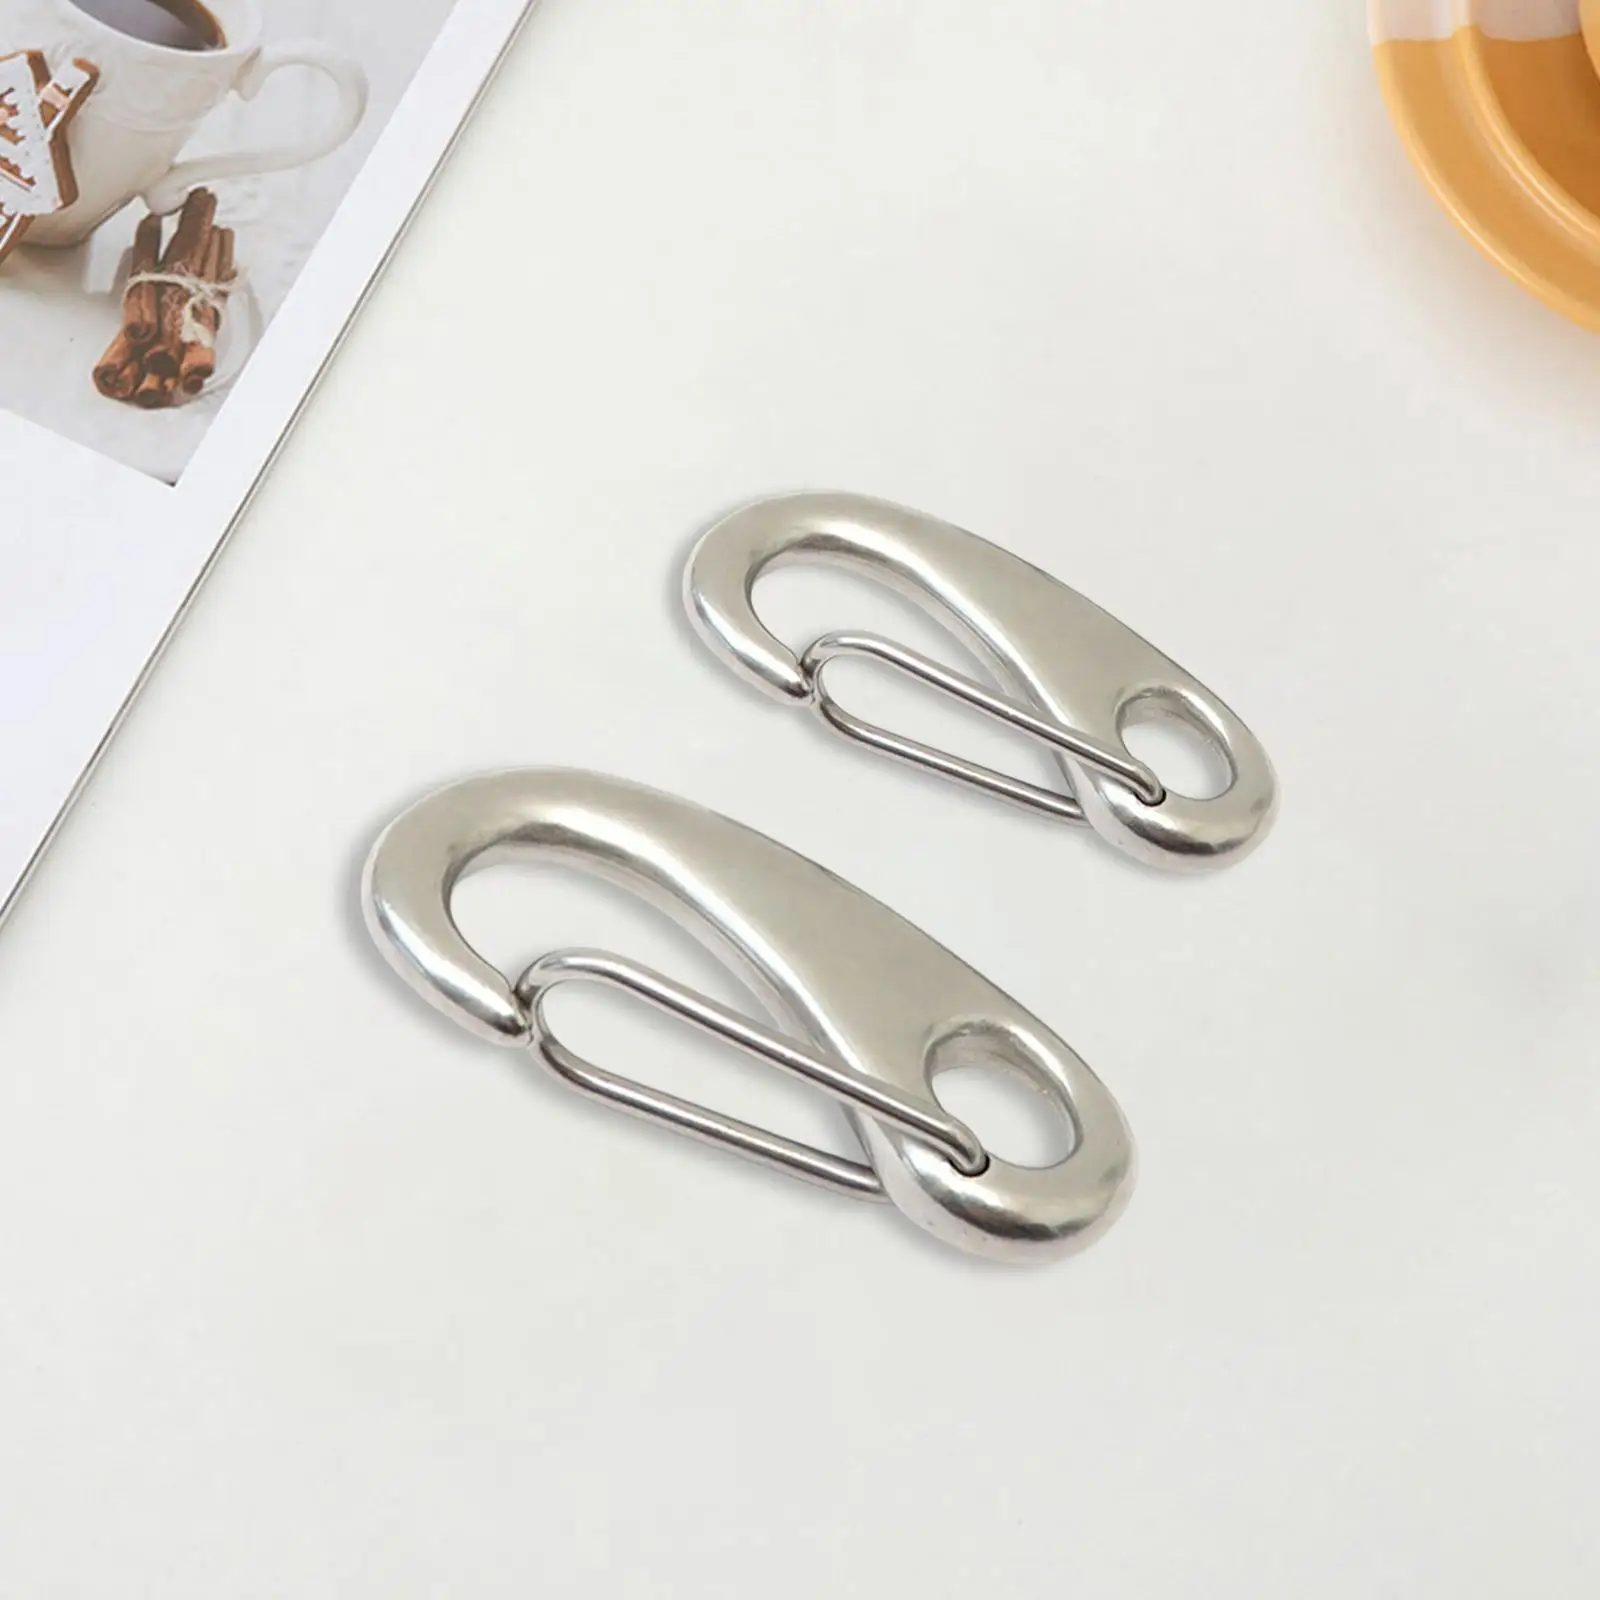 Durable Spring Snap Hook Clip Key Rings Improved SS316 Stainless Clasp Carabiners Clip for Scuba Diving